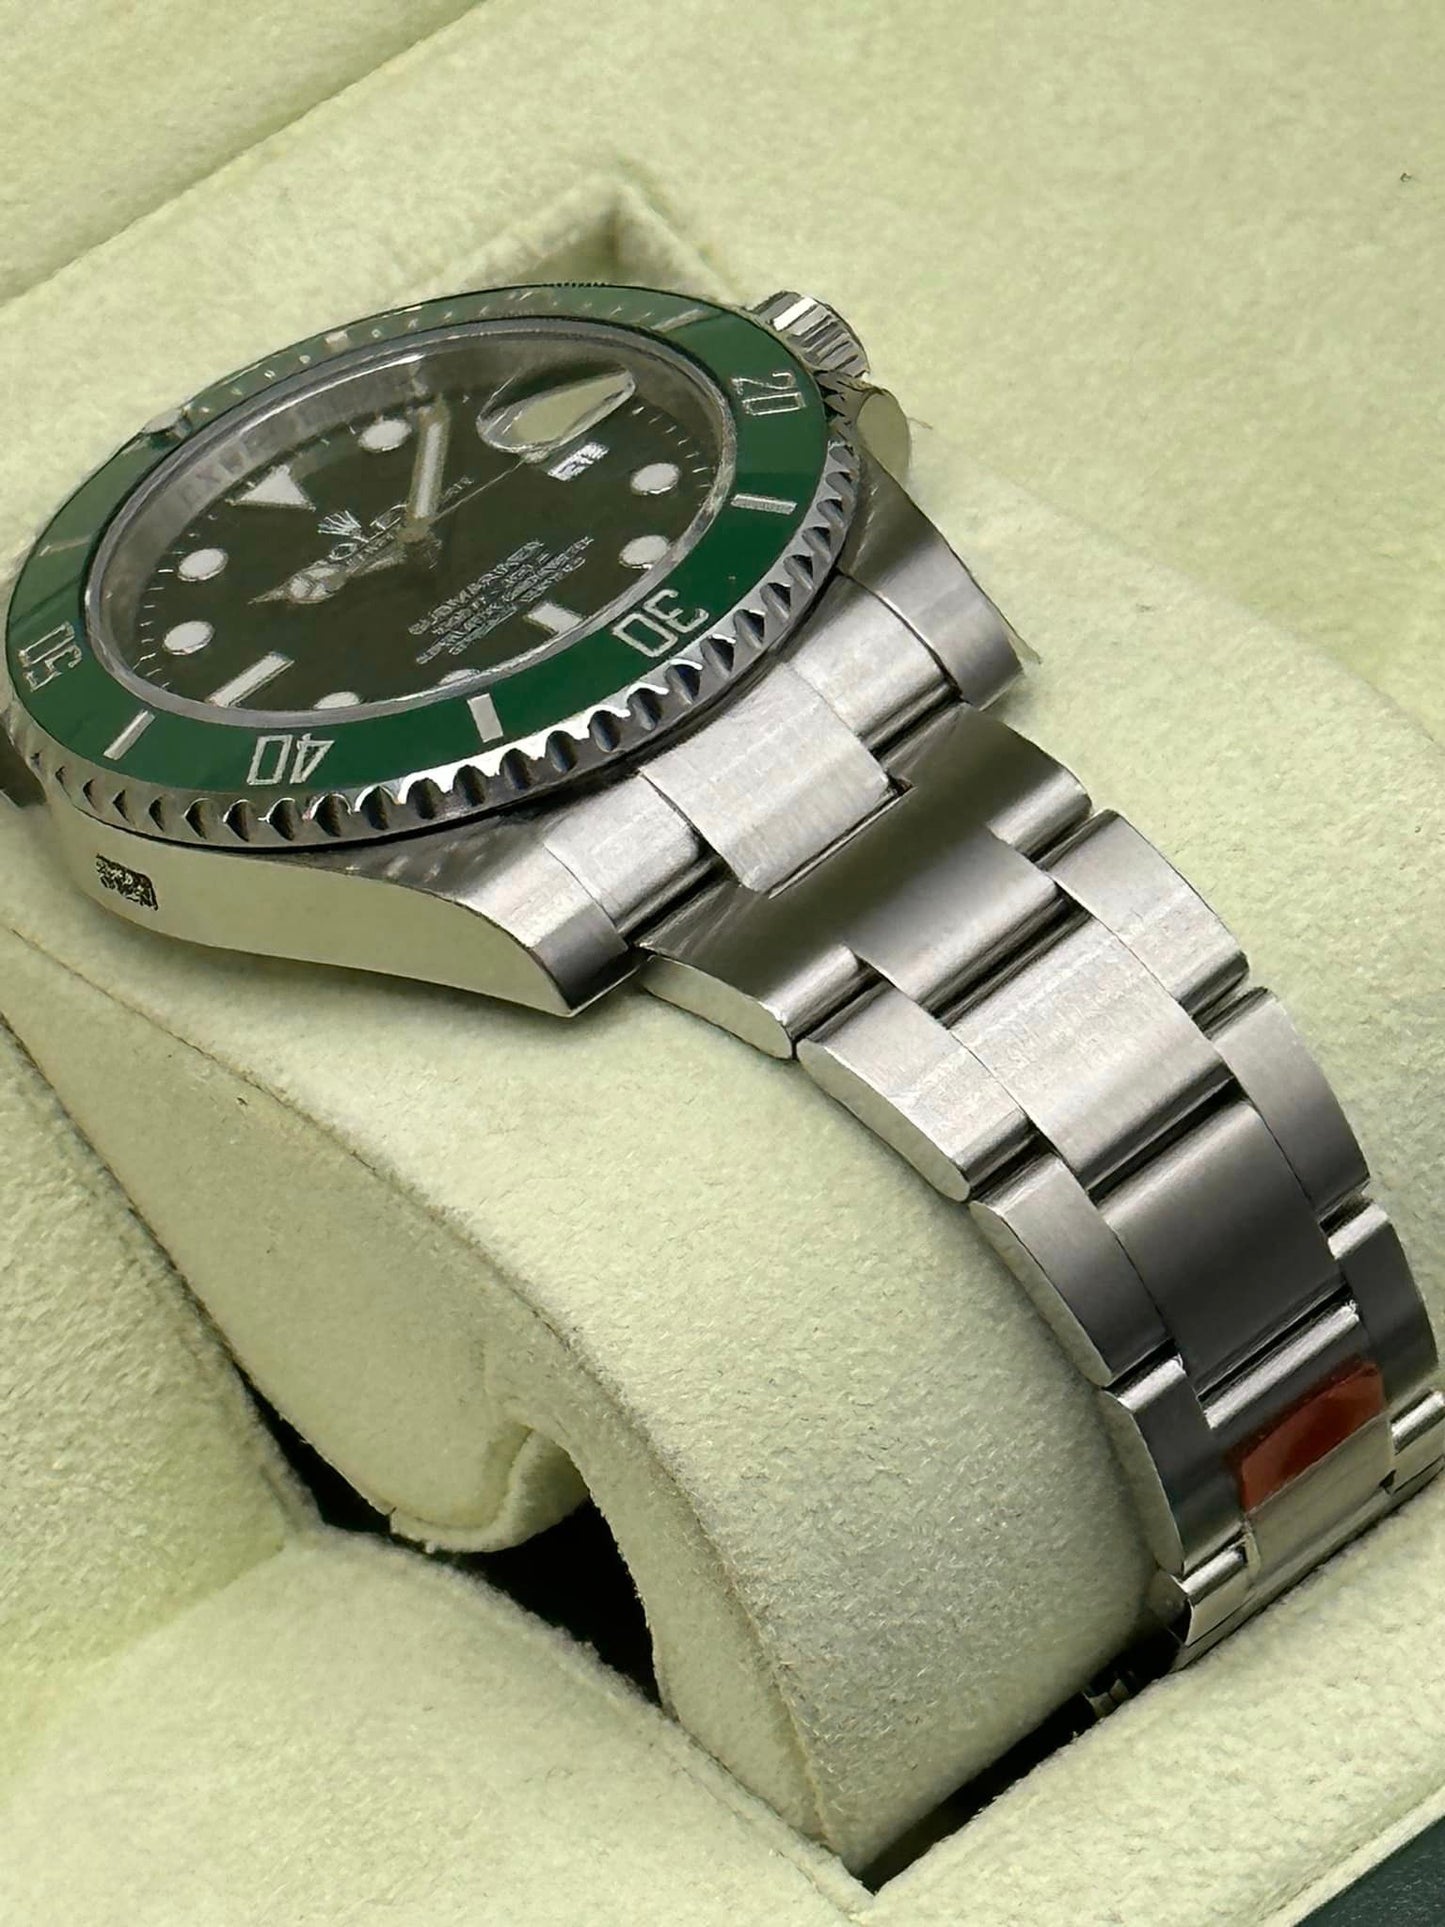 He Throws His Rolex Submariner Hulk Into the Ocean!? — Life on